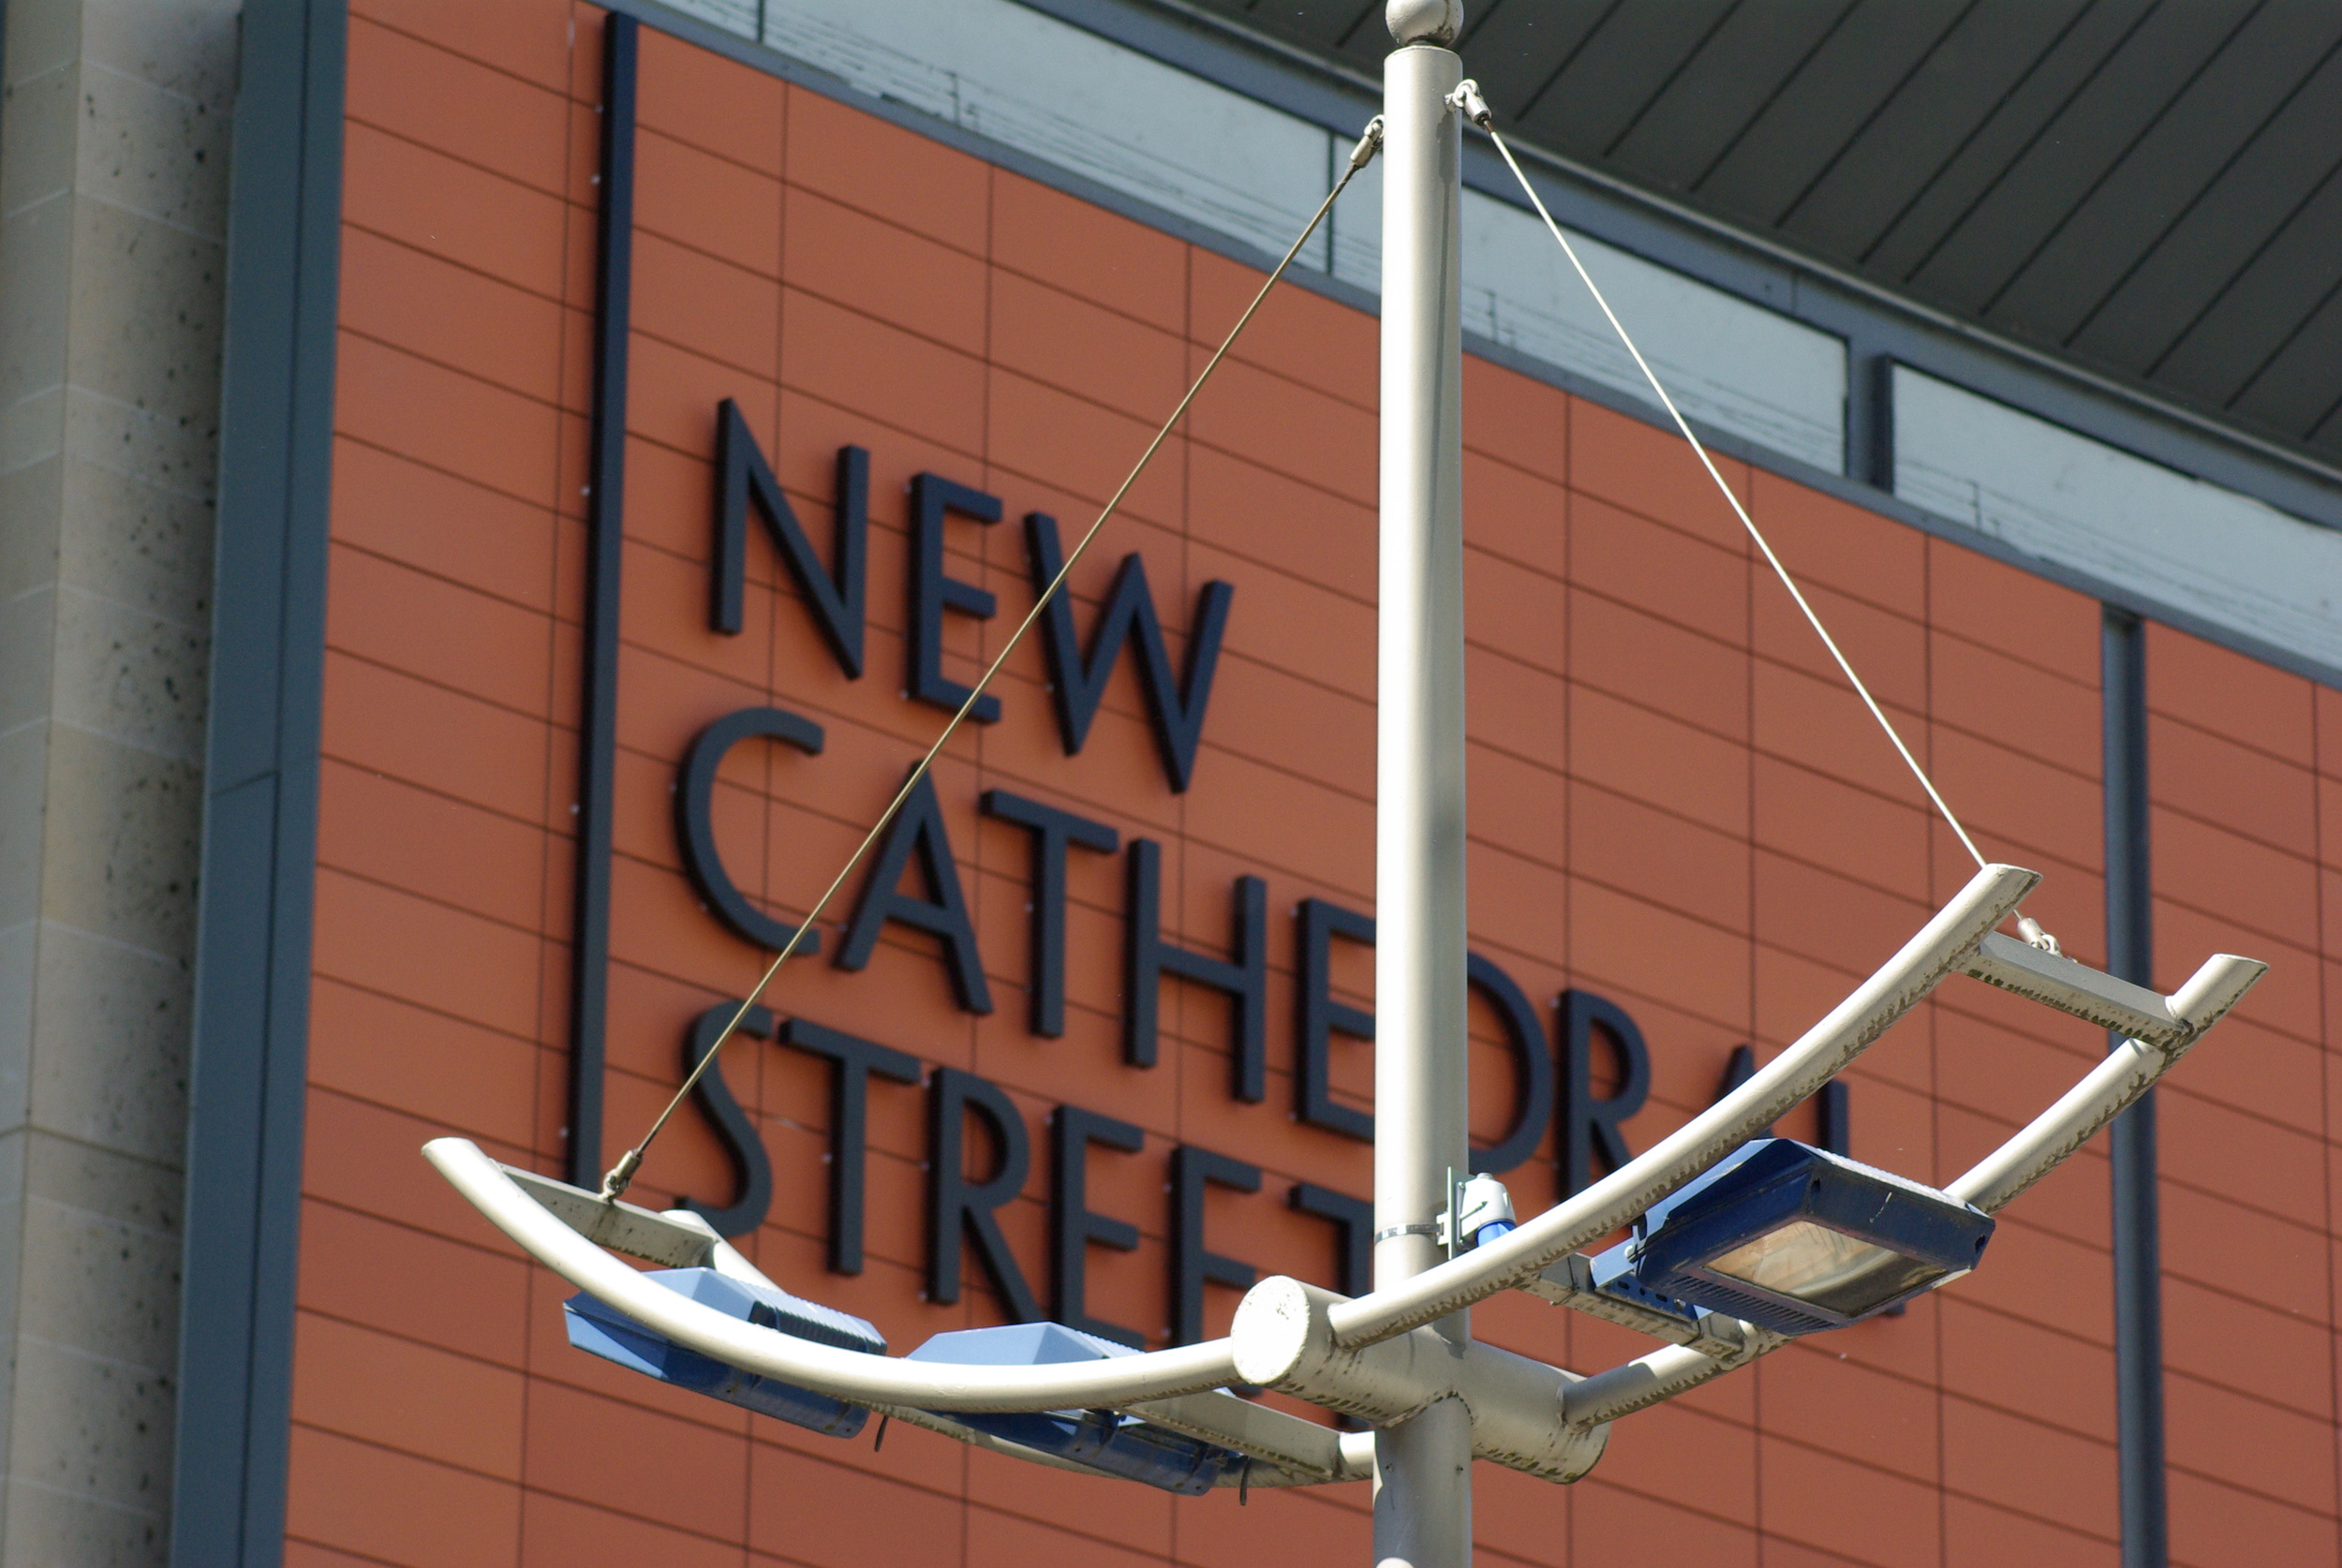 New Cathedral Street Sign